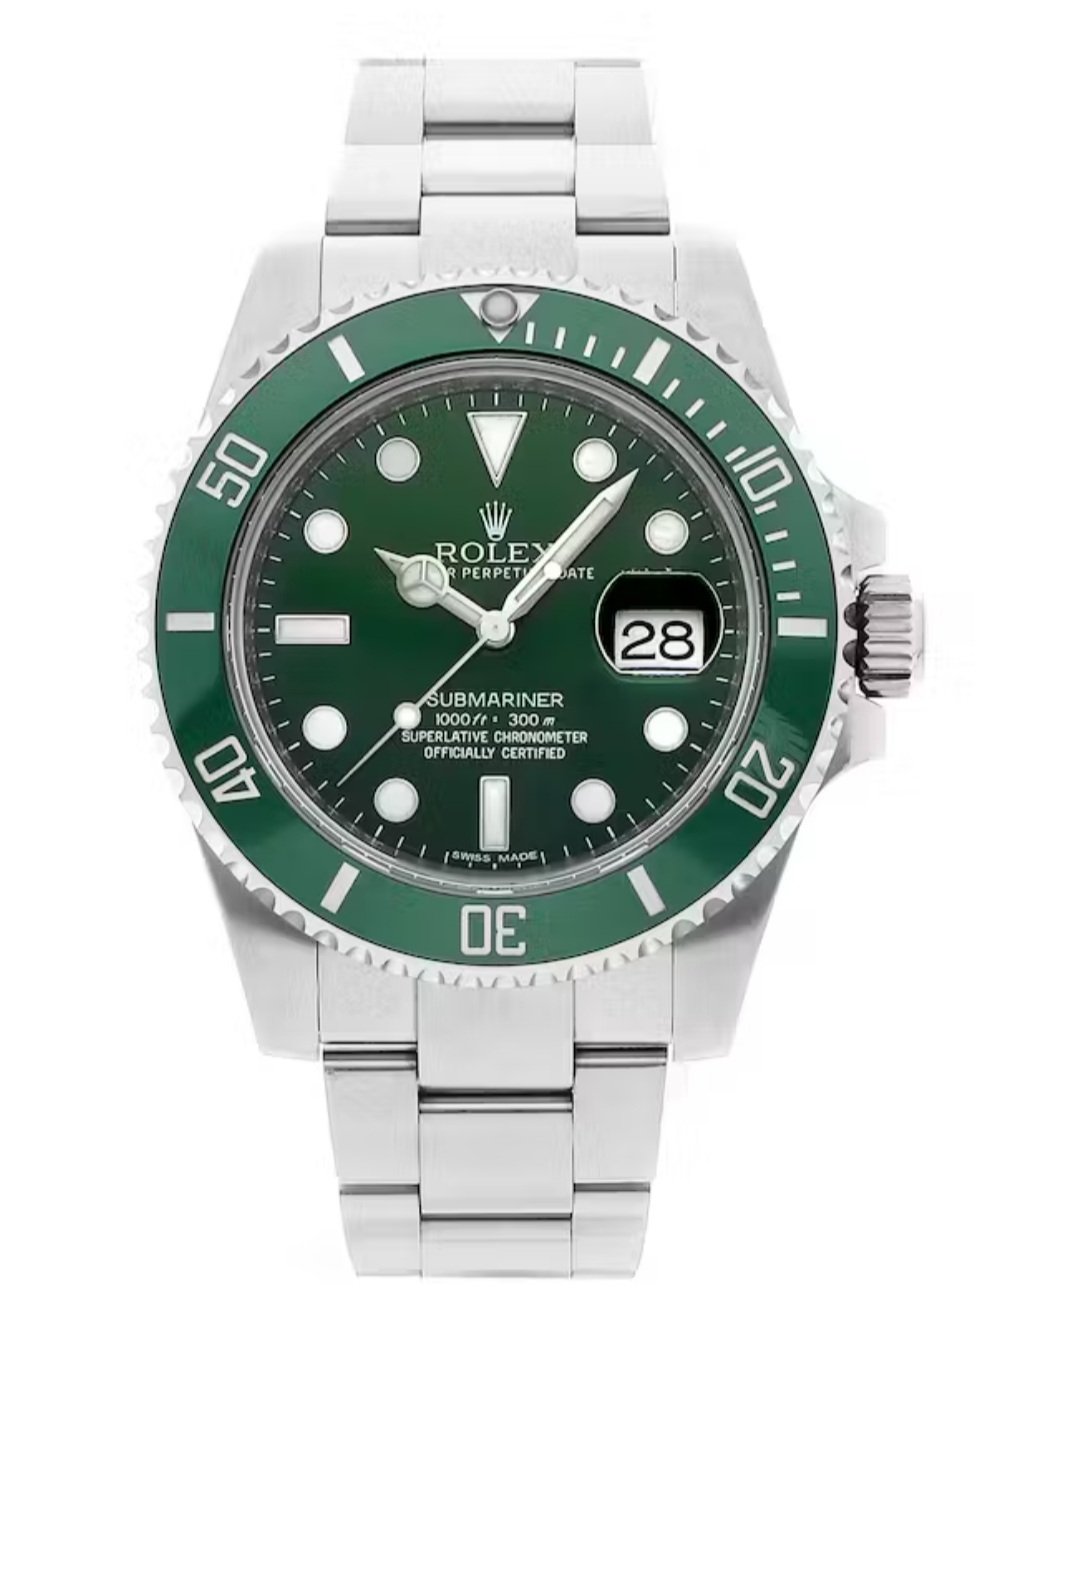 Submariner Hulk 116610LV Free Shipping Comes with Box papers and